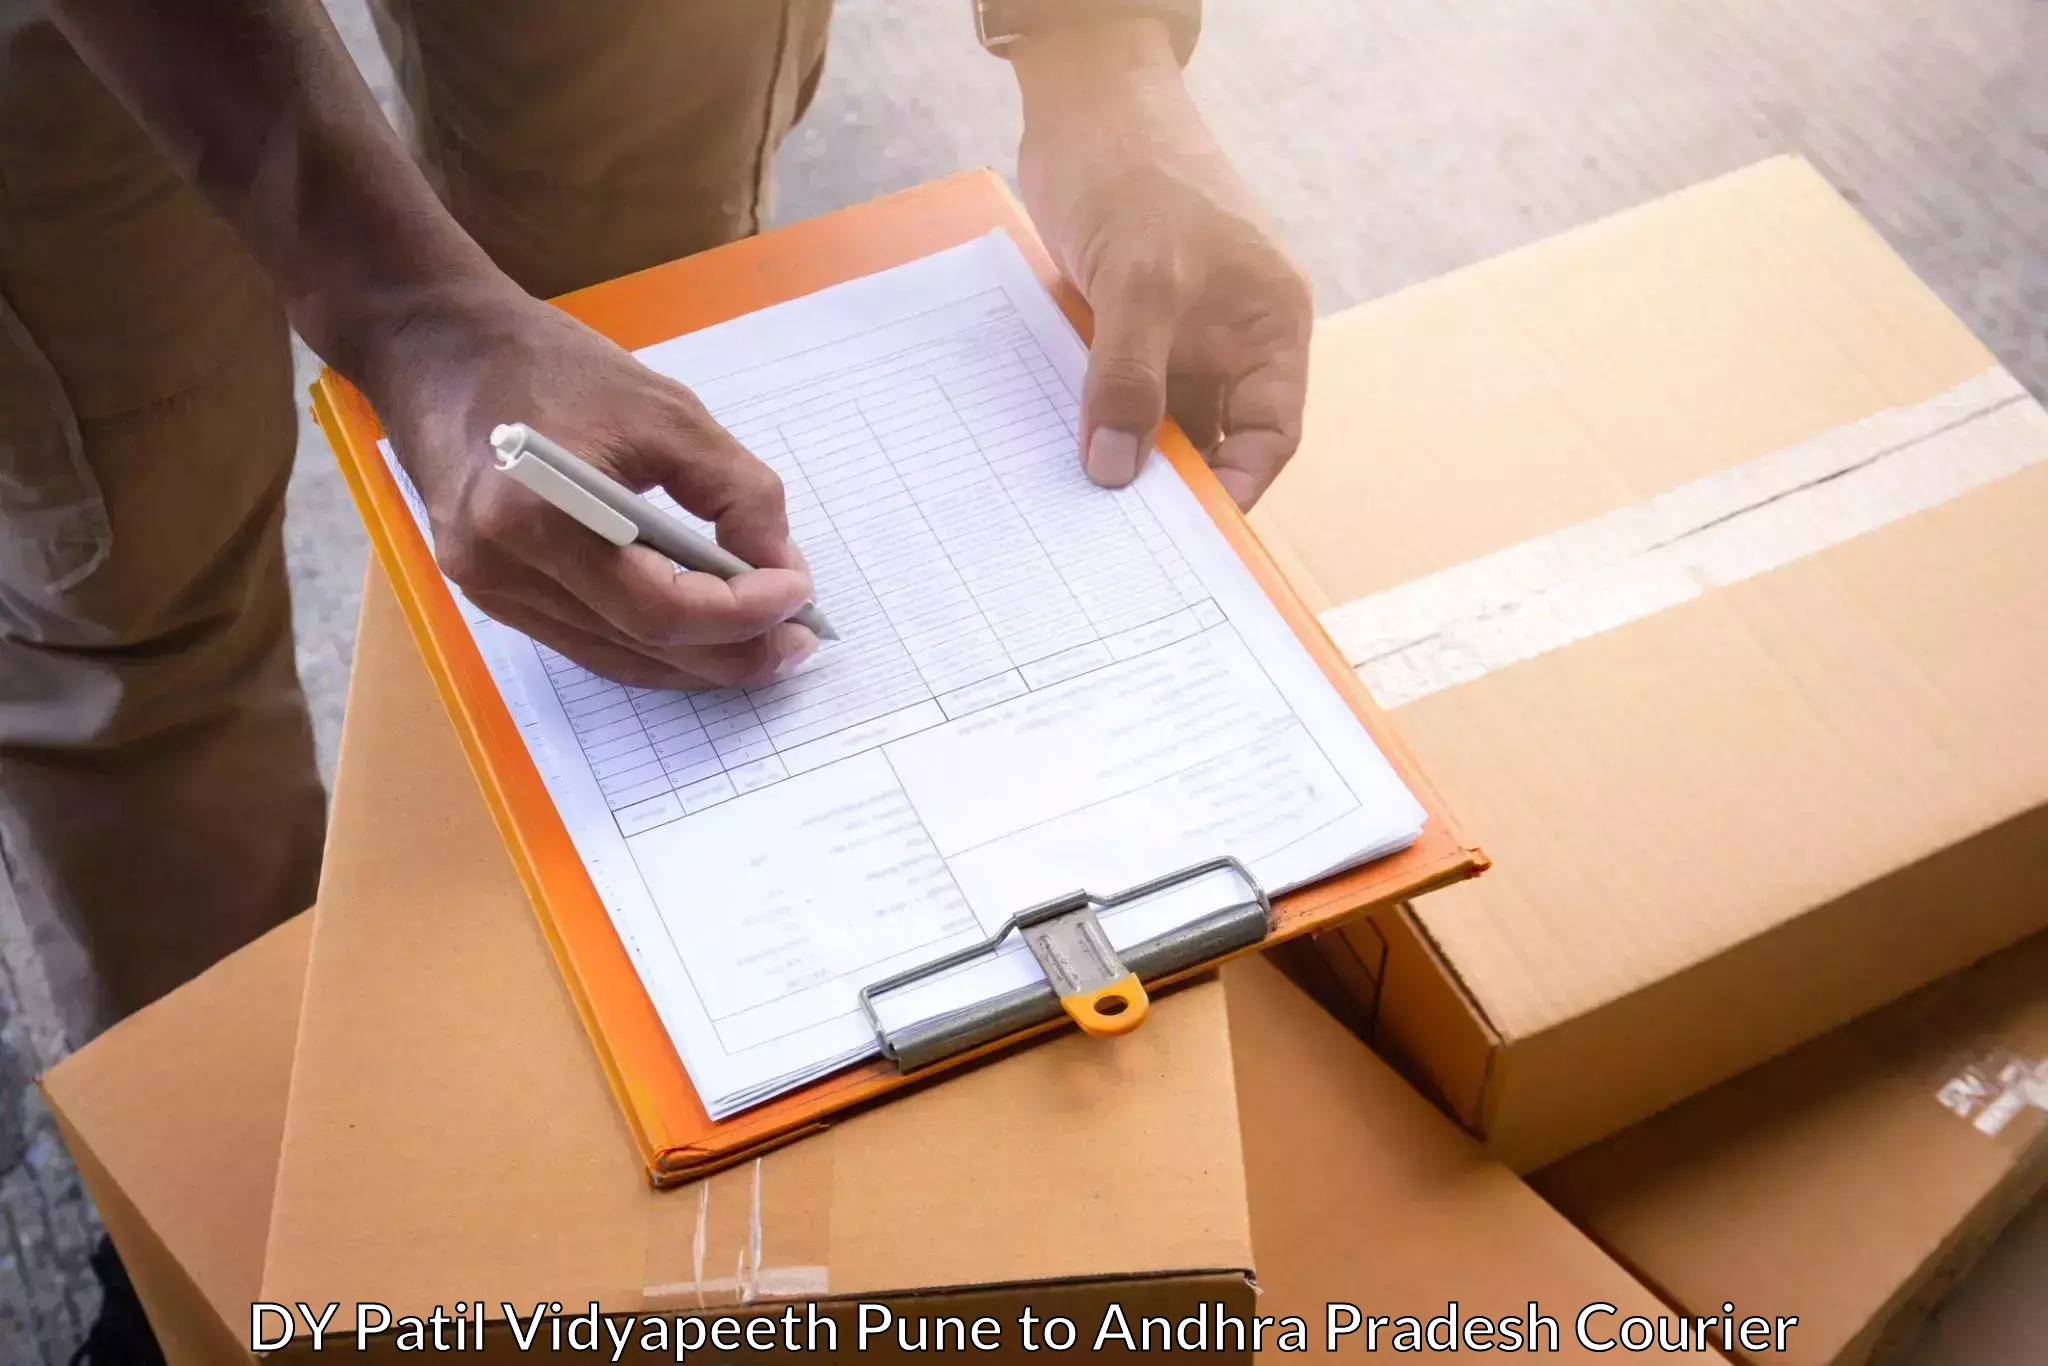 24/7 courier service in DY Patil Vidyapeeth Pune to Waltair